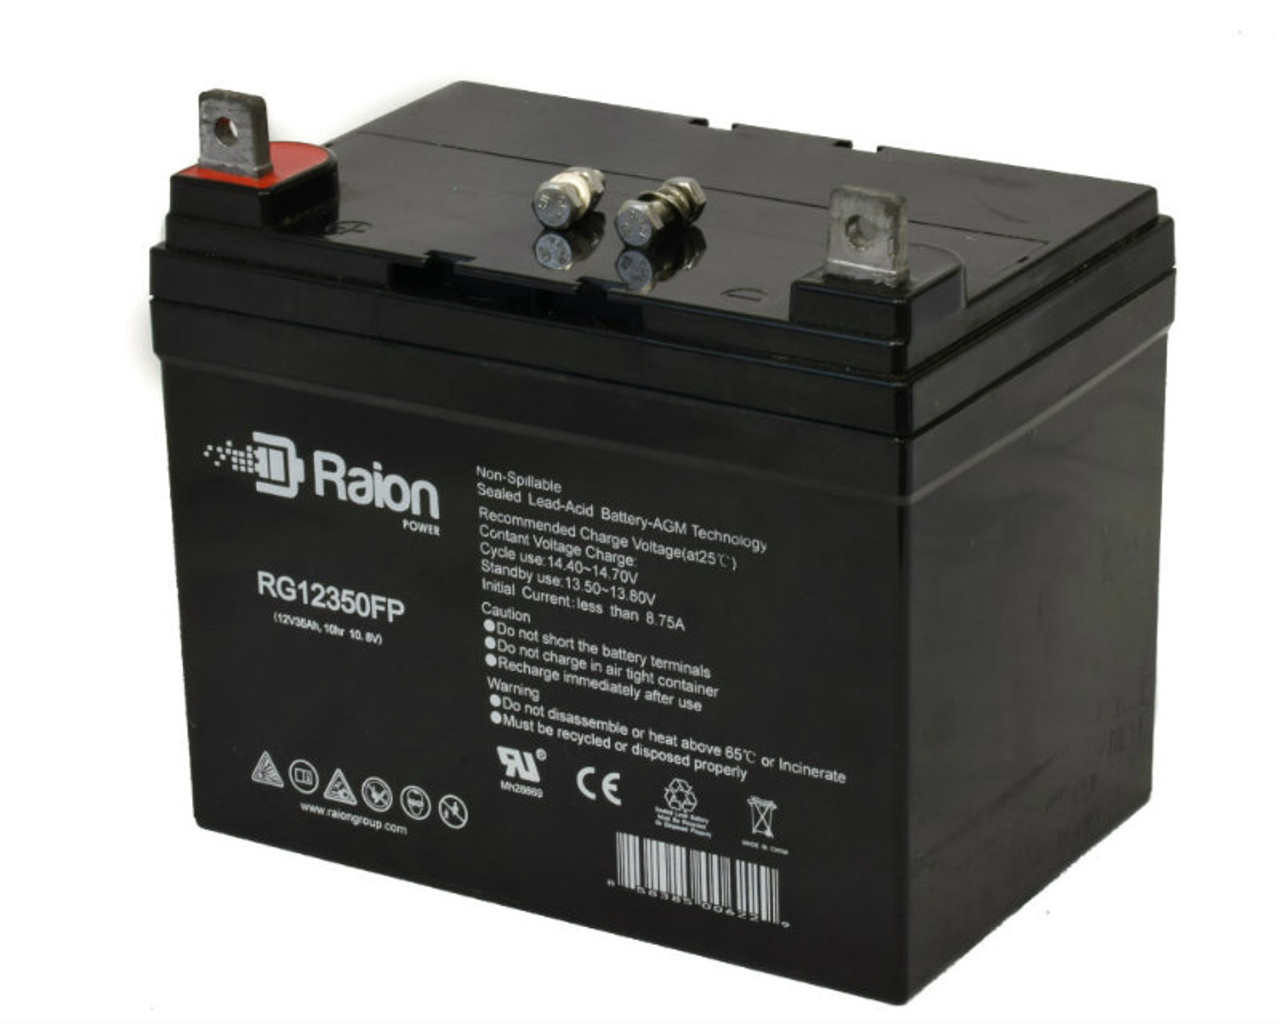 Raion Power Replacement 12V 35Ah RG12350FP Battery for Yard-Man W804H